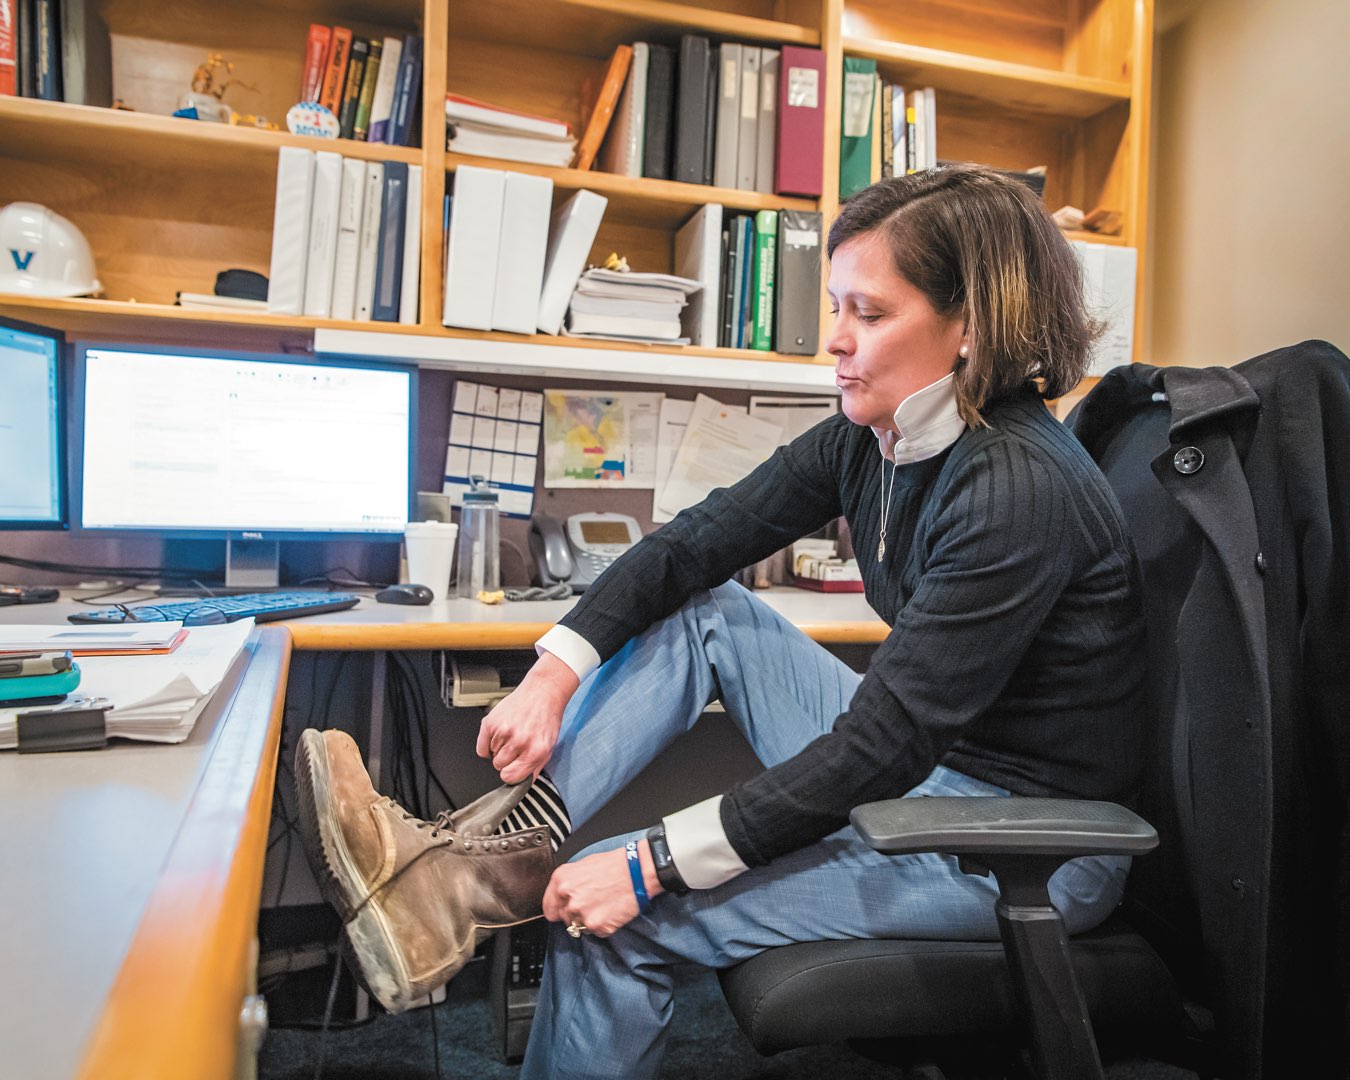 At her desk, Villanova senior project manager Marilou Smith laces up her brown worn construction boots